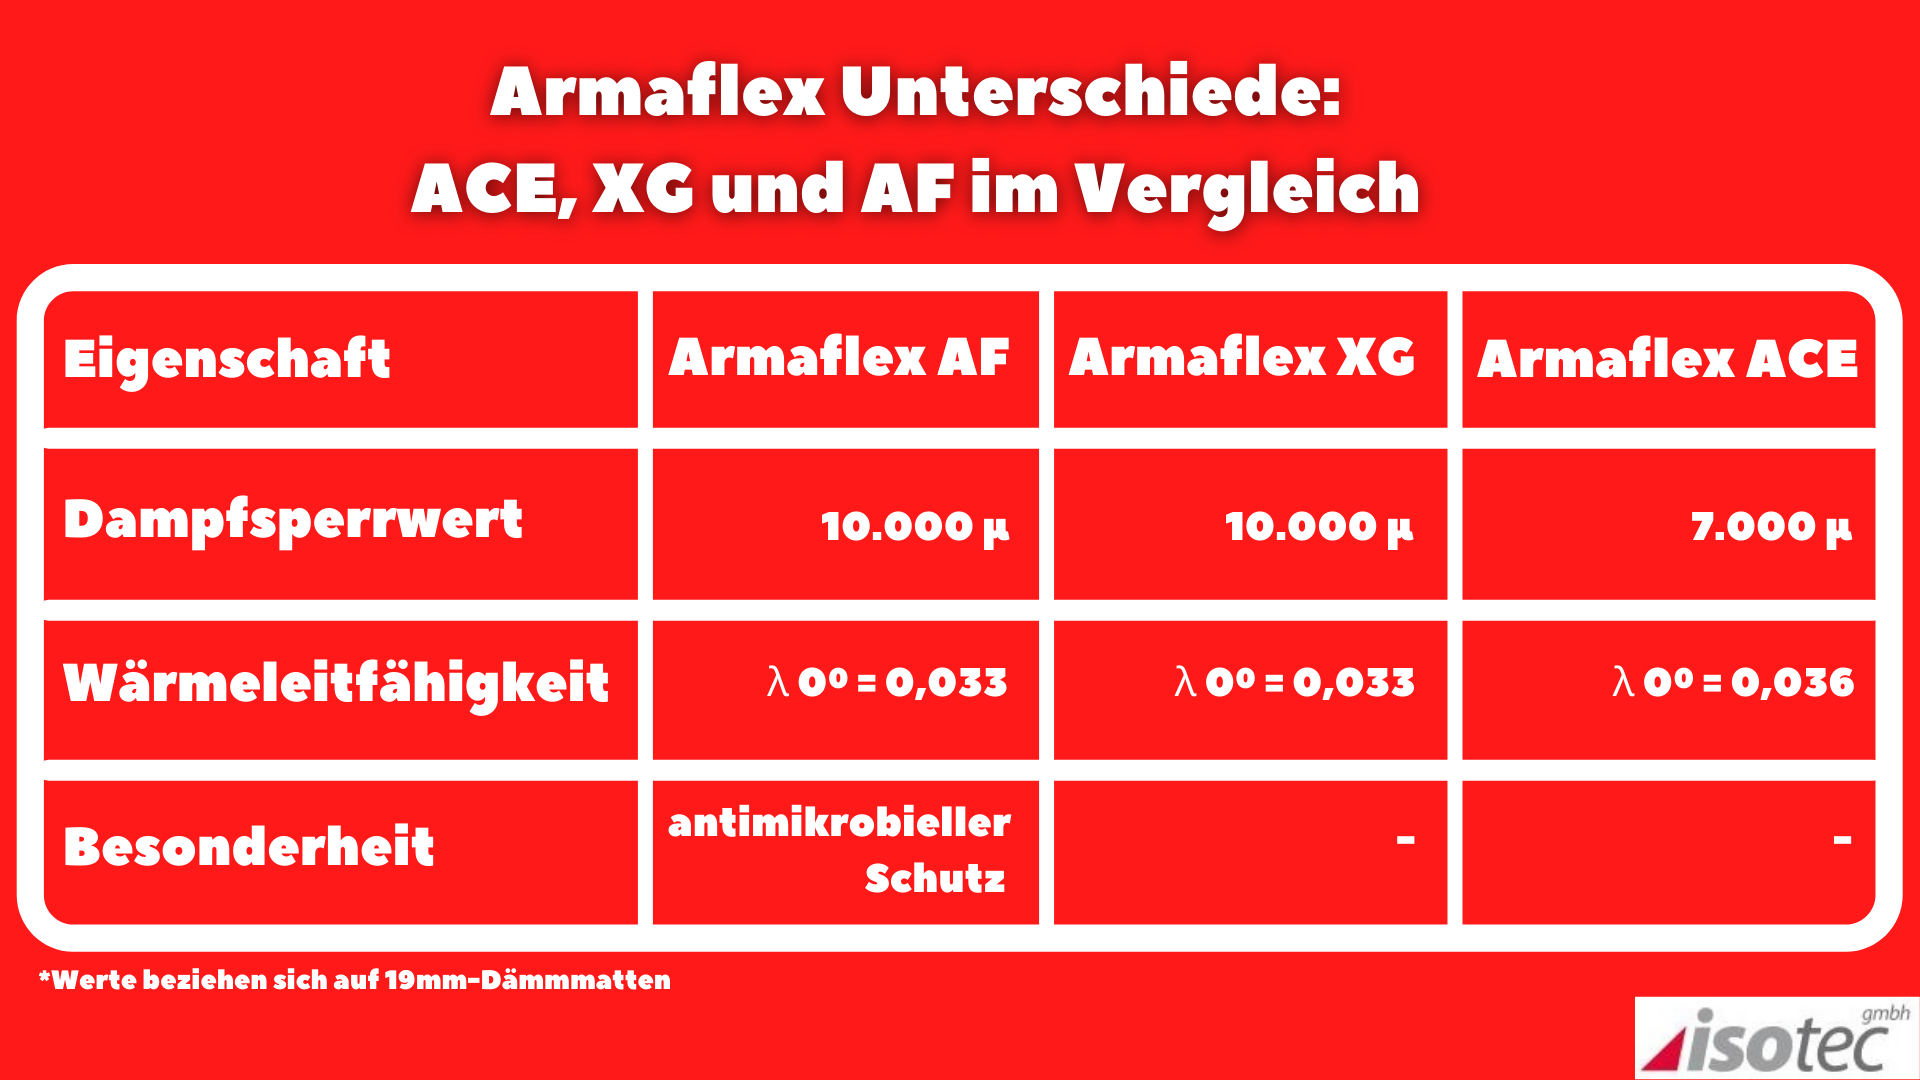 Armaflex differences: ACE, XG and AF in comparison